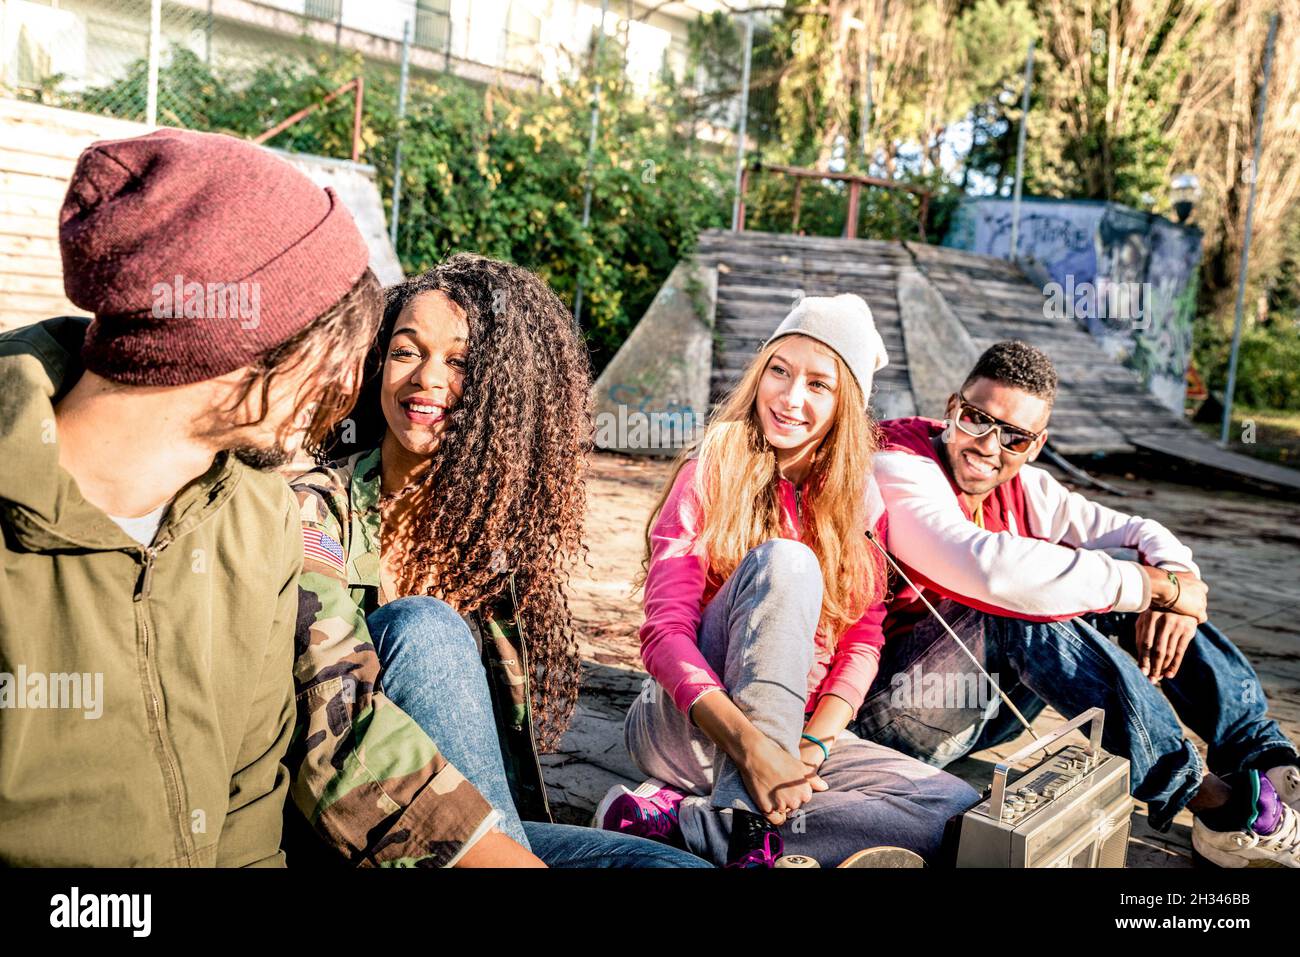 Group of urban style friends having fun time out at skate bmx park - Youth friendship concept with people together outdoors Stock Photo